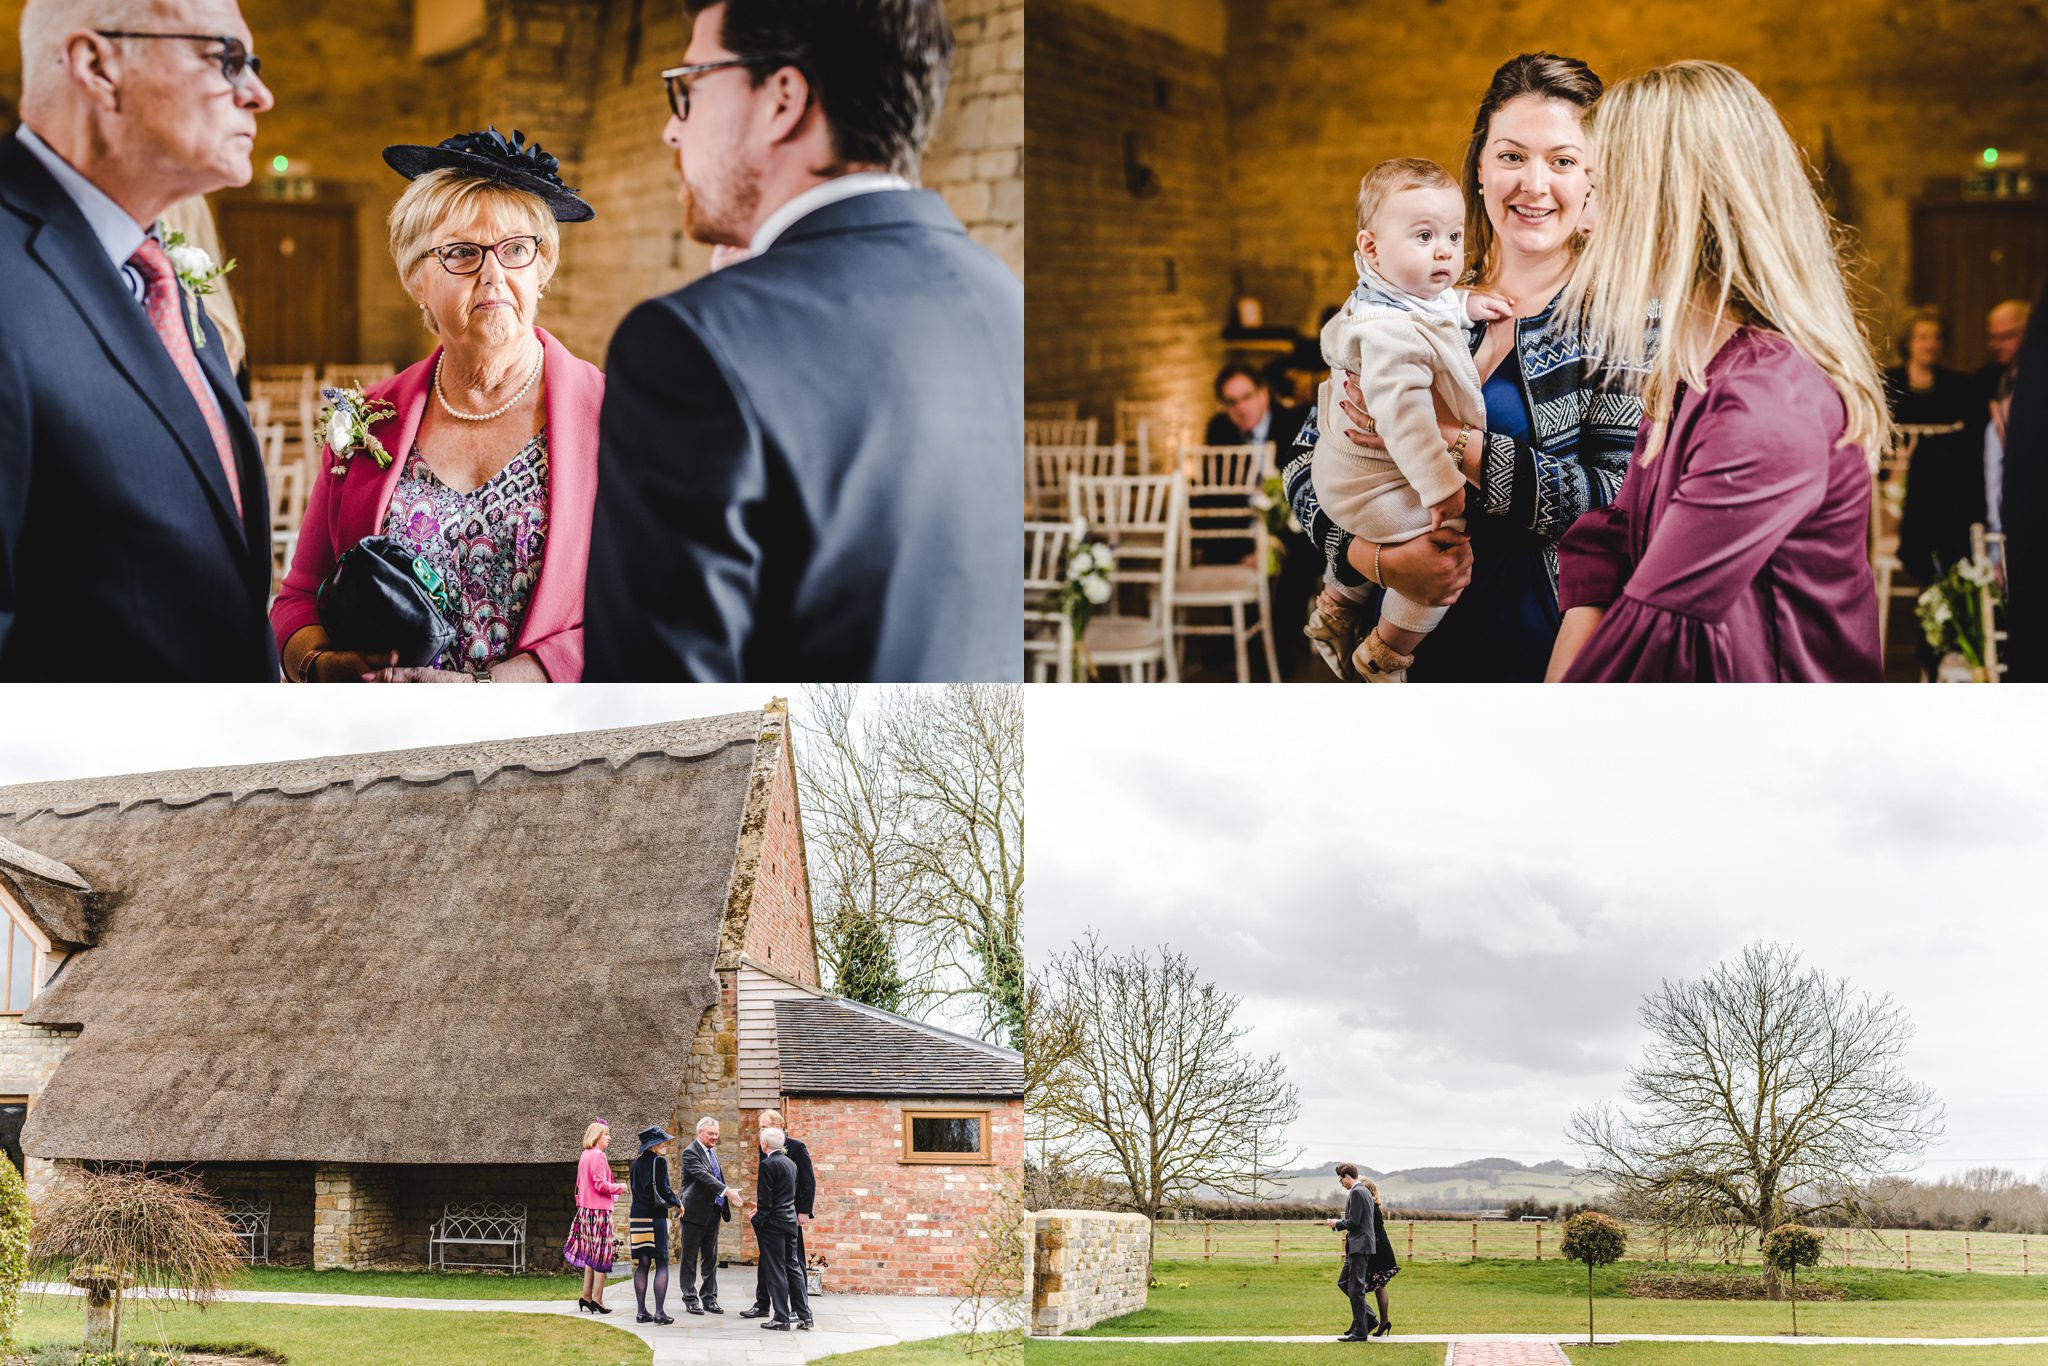 Candid pictures of wedding guests at Blackwell Grange